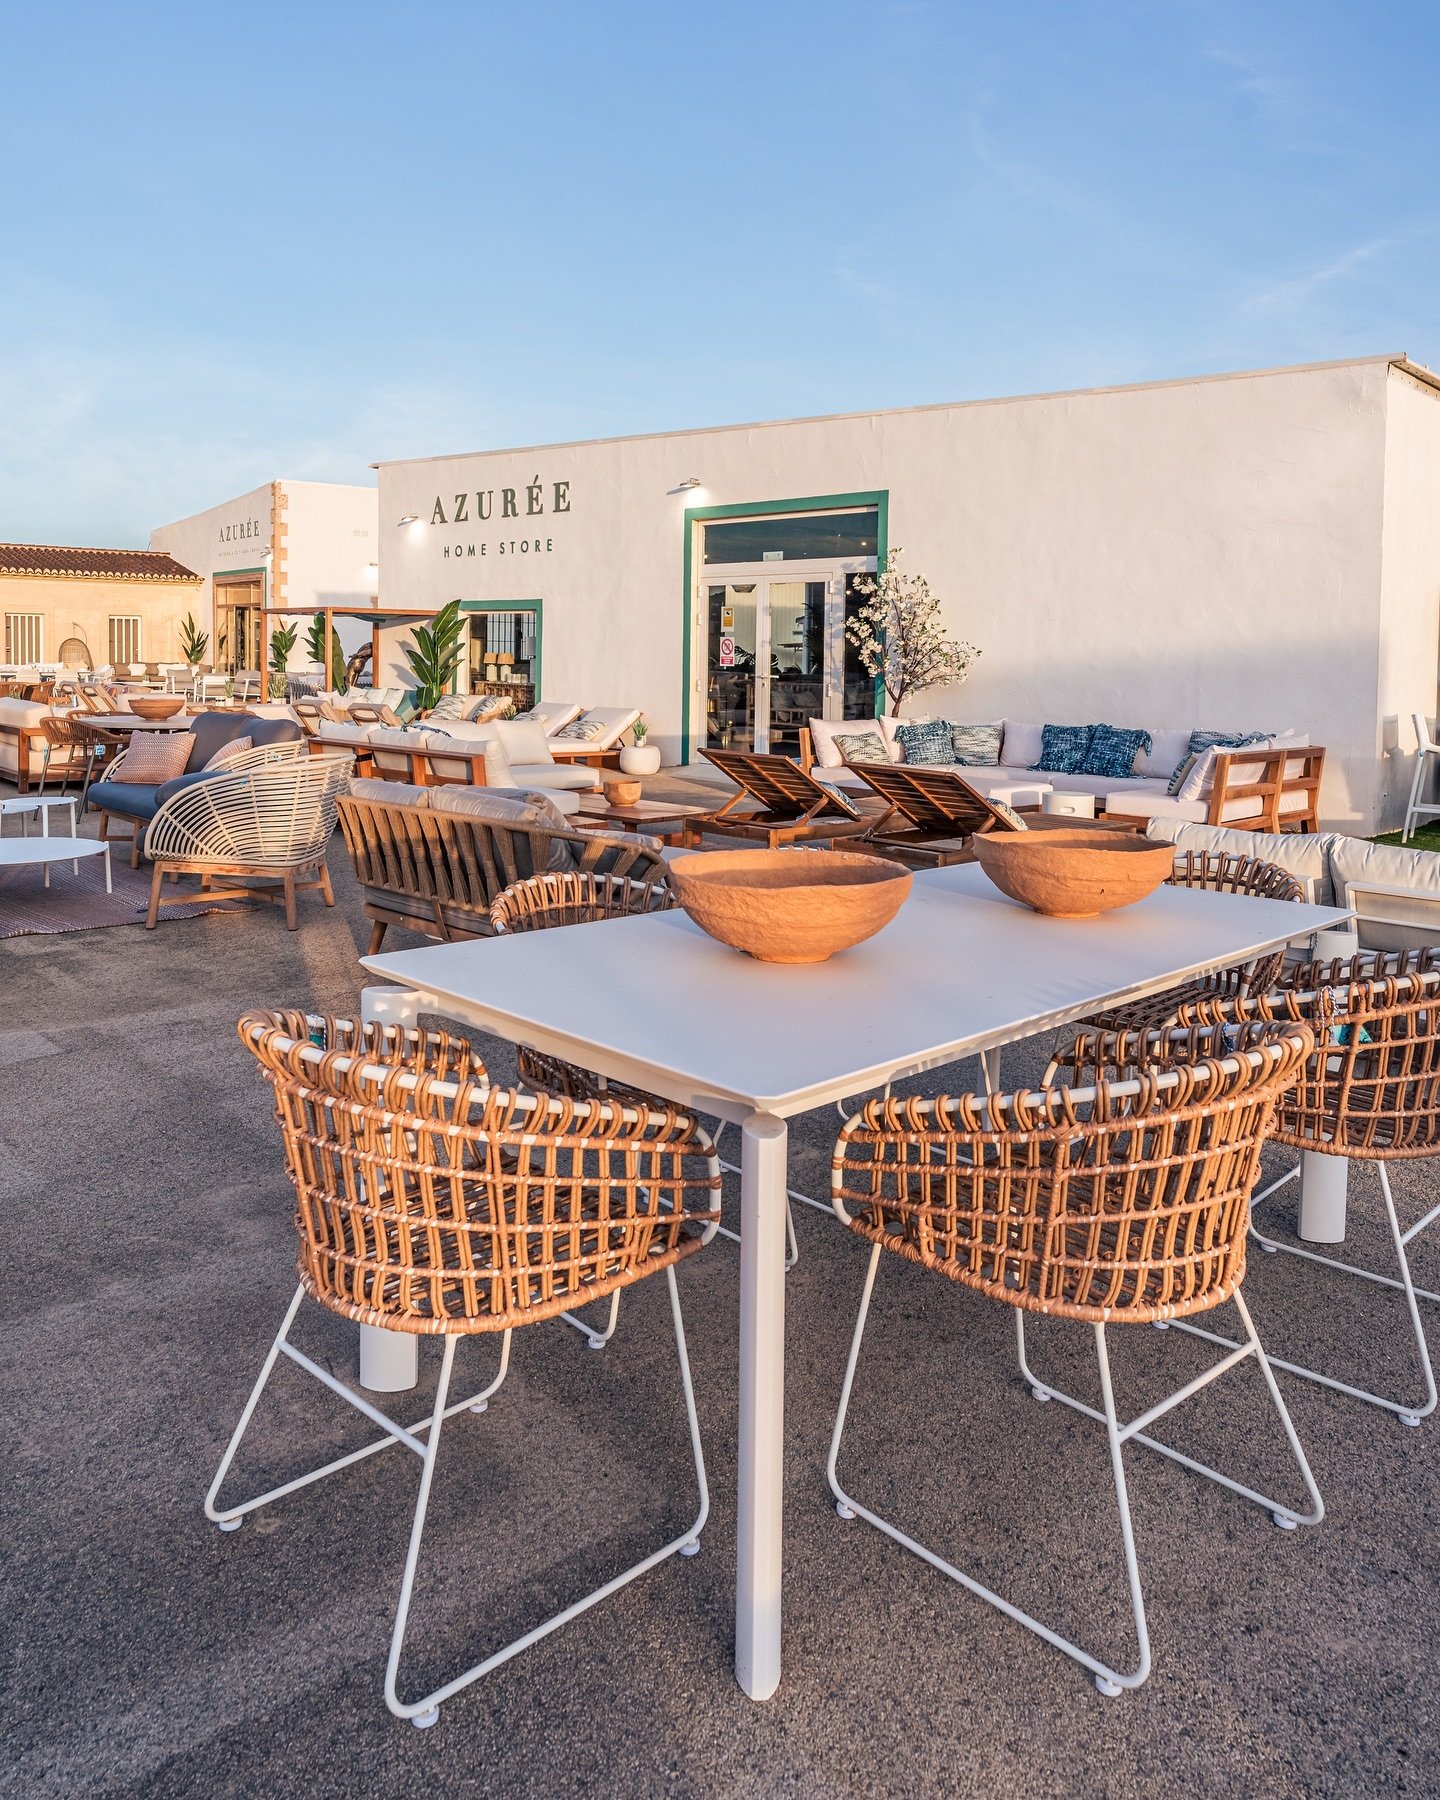 Are you ready to transform your outdoor spaces with Azuree Home Store J&aacute;vea? We are the furniture store in J&aacute;vea that offers a unique collection of earthy, natural and woody furniture that will make your home stand out.